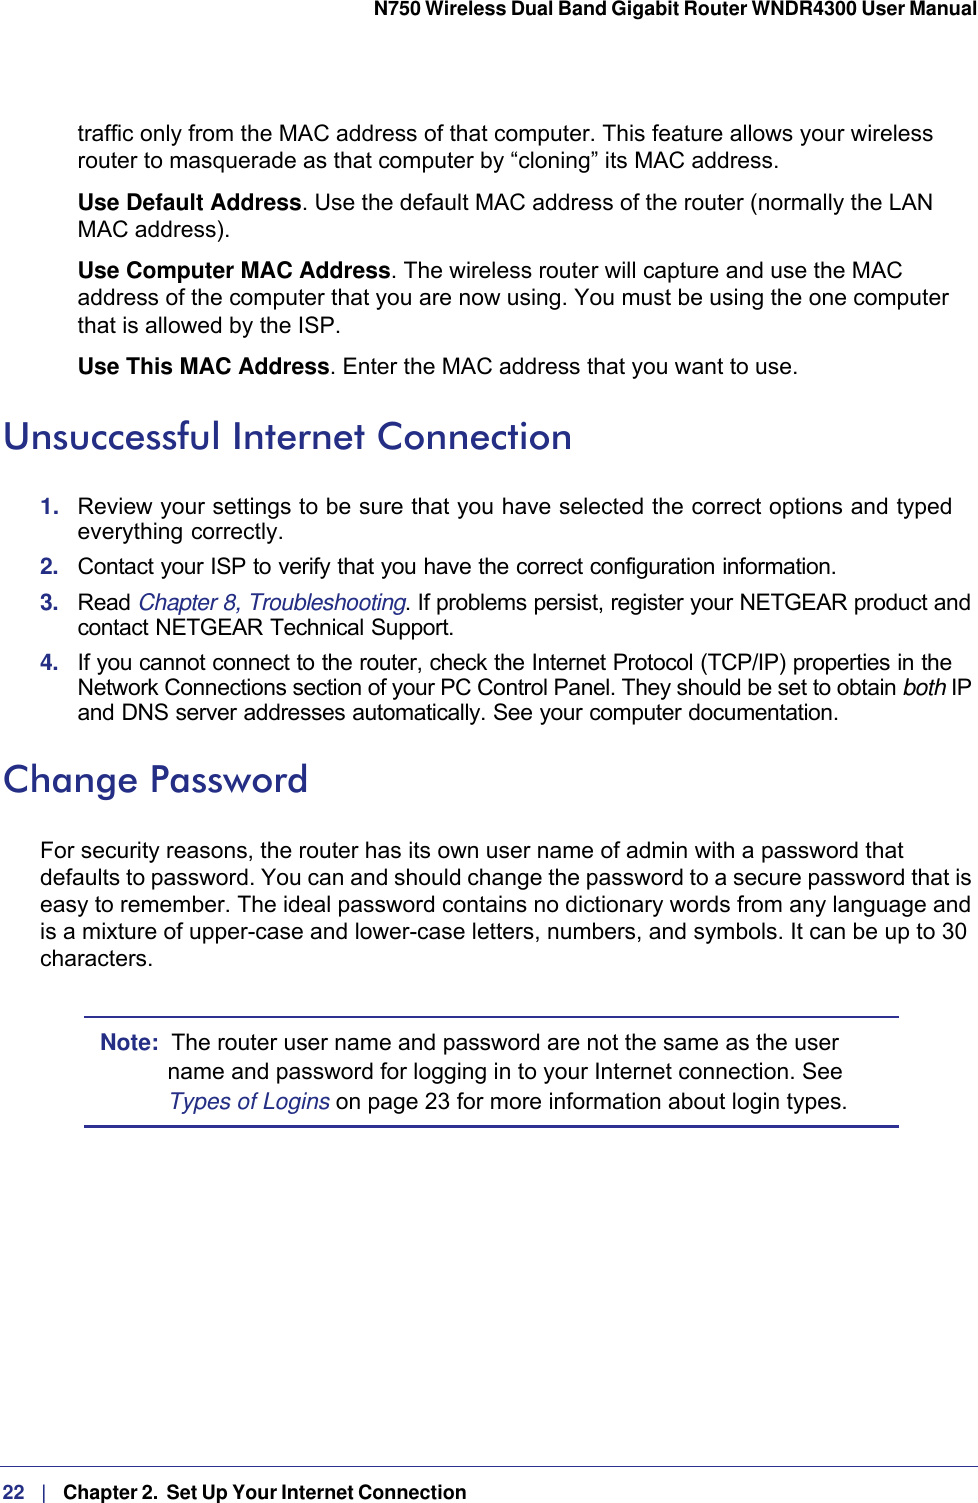 22   |   Chapter 2.  Set Up Your Internet Connection  N750 Wireless Dual Band Gigabit Router WNDR4300 User Manual traffic only from the MAC address of that computer. This feature allows your wireless router to masquerade as that computer by “cloning” its MAC address. Use Default Address. Use the default MAC address of the router (normally the LAN MAC address).Use Computer MAC Address. The wireless router will capture and use the MAC address of the computer that you are now using. You must be using the one computer that is allowed by the ISP.Use This MAC Address. Enter the MAC address that you want to use.Unsuccessful Internet Connection1.  Review your settings to be sure that you have selected the correct options and typed everything correctly. 2.  Contact your ISP to verify that you have the correct configuration information.3.  Read Chapter 8, Troubleshooting. If problems persist, register your NETGEAR product and contact NETGEAR Technical Support.4.  If you cannot connect to the router, check the Internet Protocol (TCP/IP) properties in the Network Connections section of your PC Control Panel. They should be set to obtain both IP and DNS server addresses automatically. See your computer documentation.Change PasswordFor security reasons, the router has its own user name of admin with a password that defaults to password. You can and should change the password to a secure password that is easy to remember. The ideal password contains no dictionary words from any language and is a mixture of upper-case and lower-case letters, numbers, and symbols. It can be up to 30 characters.Note:  The router user name and password are not the same as the user name and password for logging in to your Internet connection. See Types of Logins on page  23 for more information about login types.